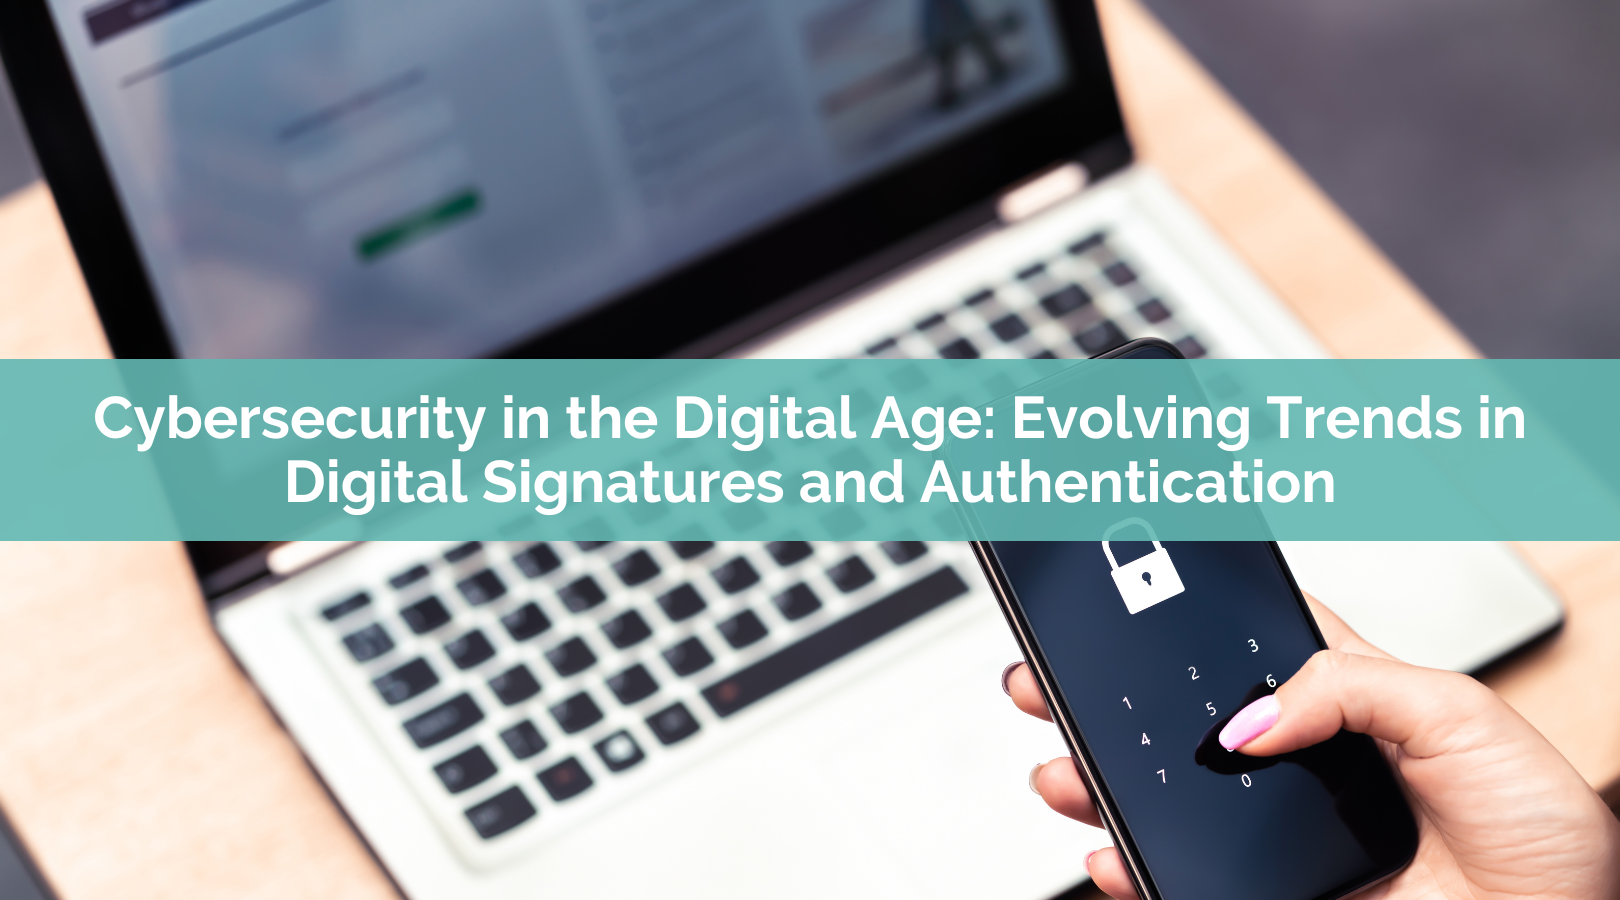 Cybersecurity in the Digital Age: Evolving Trends in Digital Signatures and Authentication